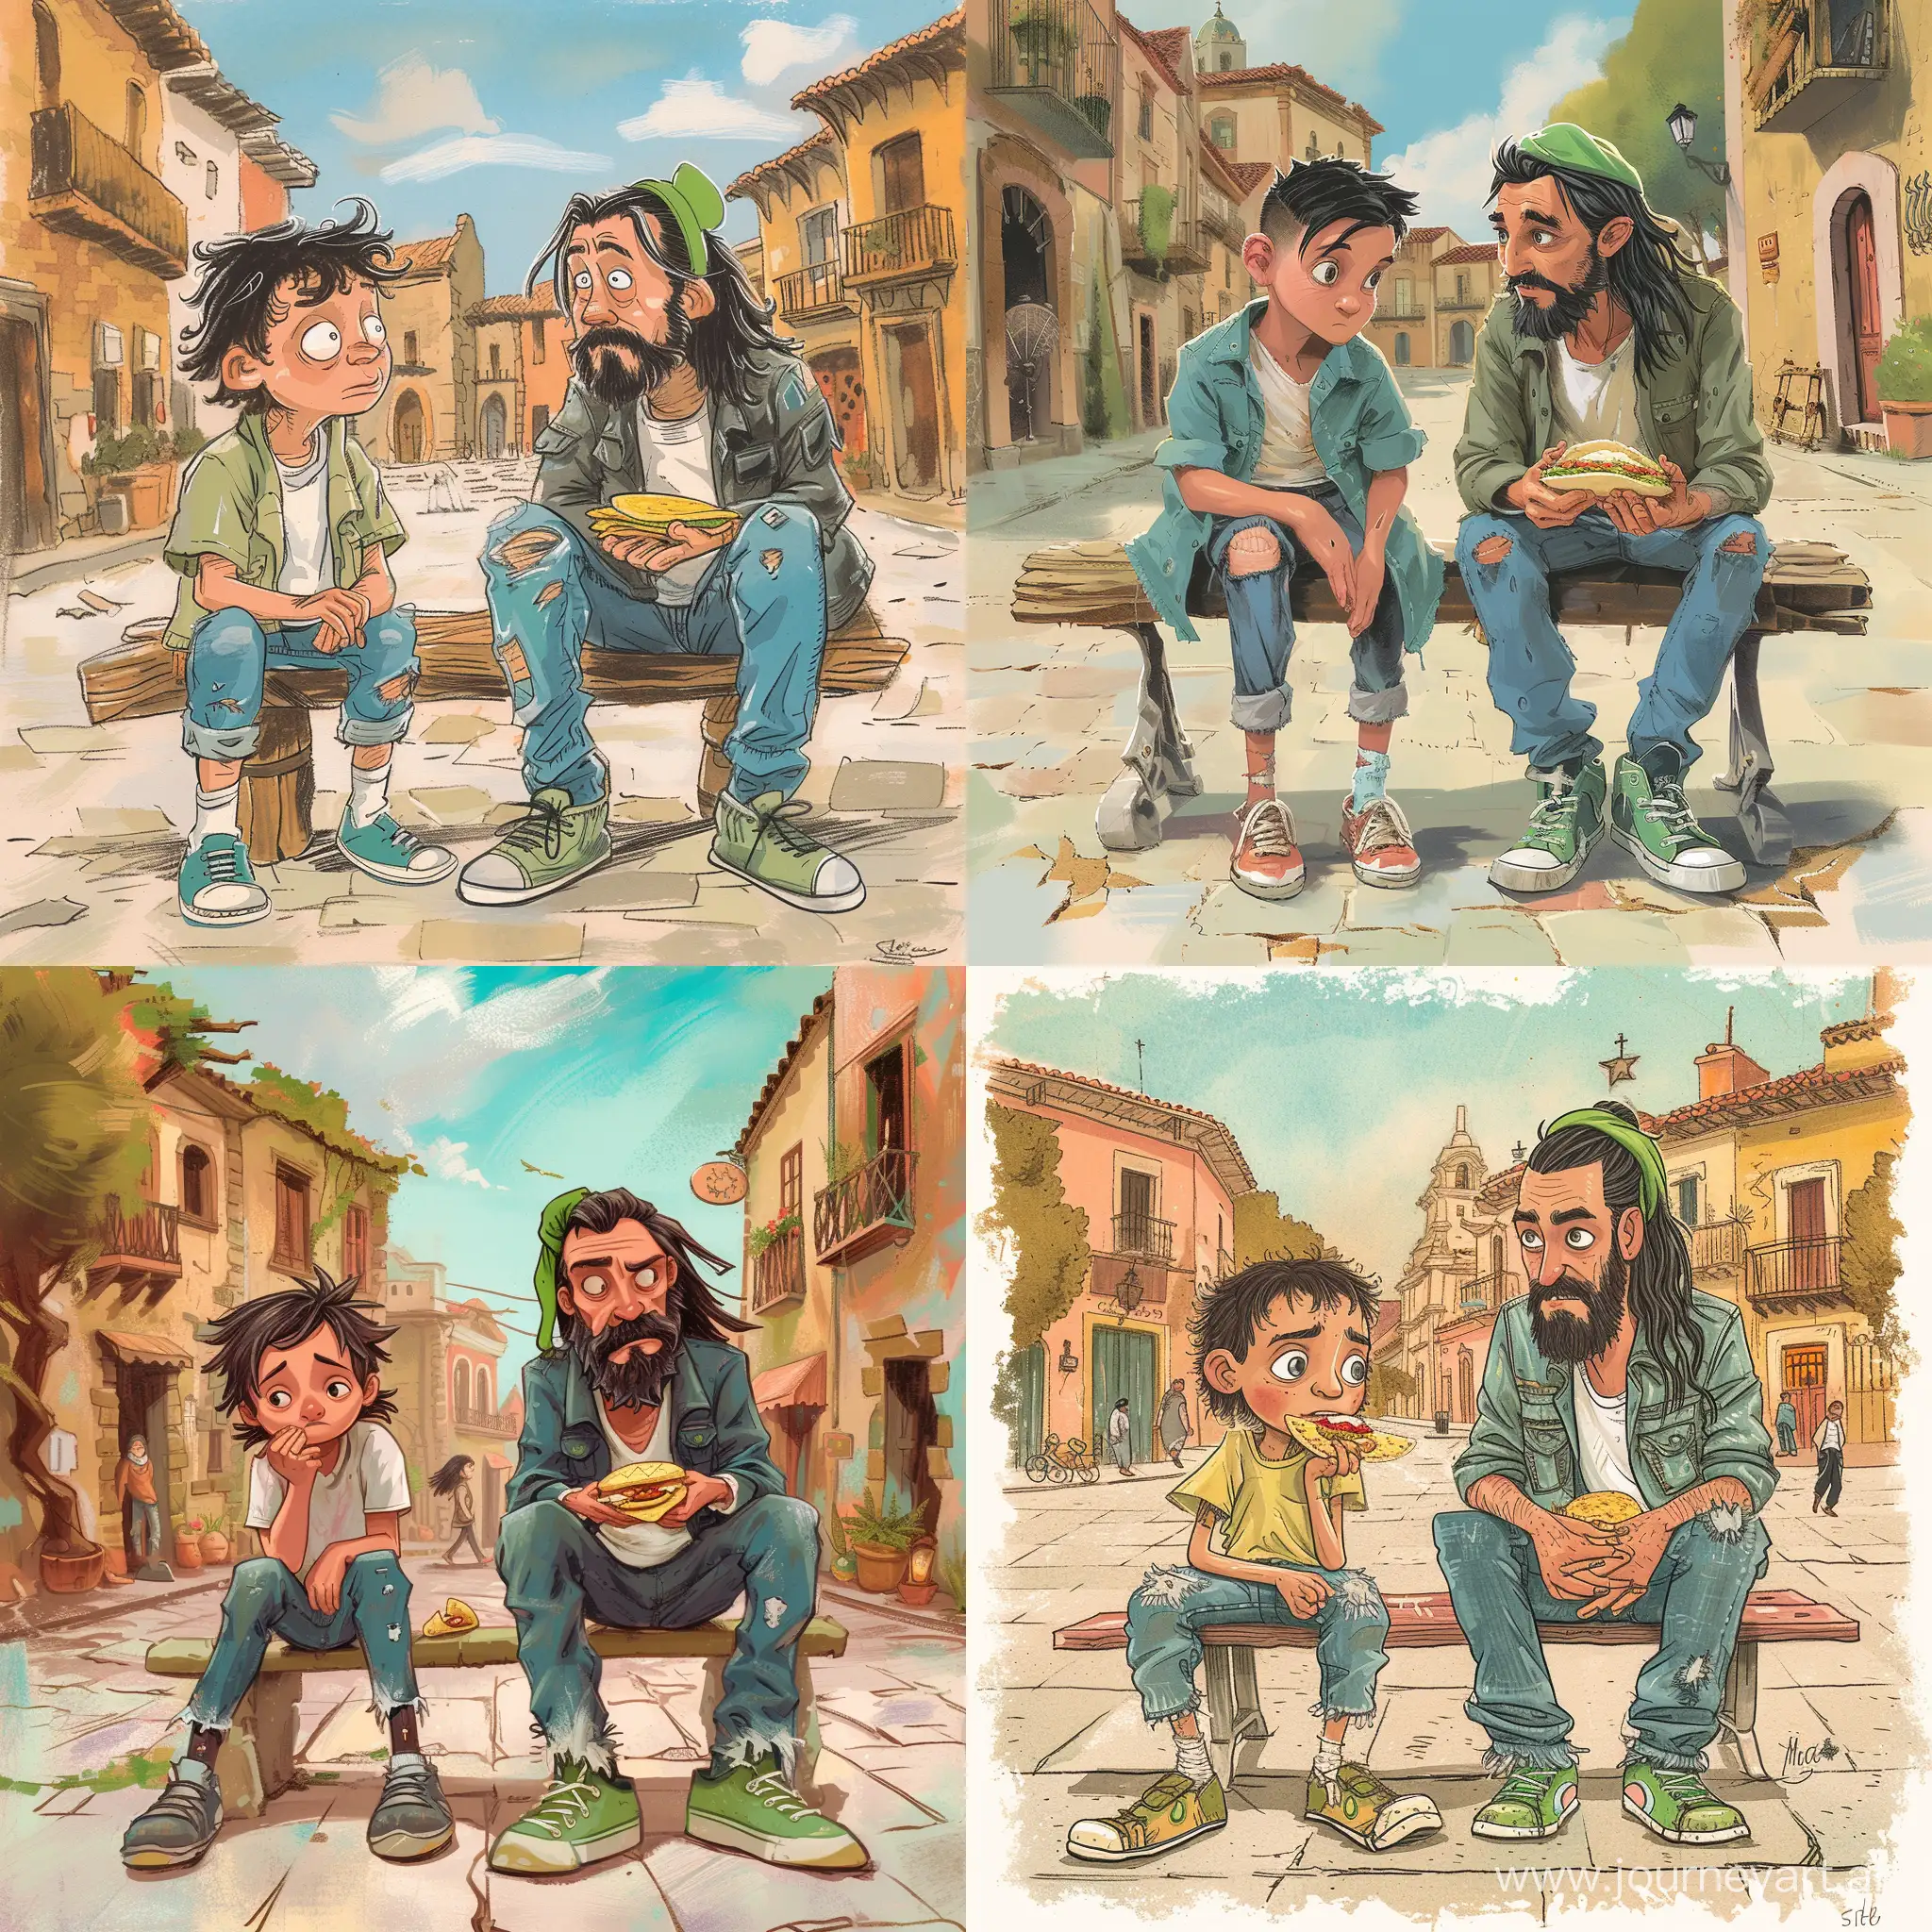 Create an illustration for a children's book for ages 6-10. The scene is in an old town square, where Felipe, a young boy previously depicted with sad eyes and ragged clothes, meets Marcos, the town's new priest. Marcos is youthful but not modern-looking, wearing slightly torn jeans, with a more traditional priestly demeanor, sporty sneakers, and long hair tied at the nape with a large green hairband. He's sitting on a bench, eating a tortilla sandwich. Ensure Felipe looks the same as in the previous illustration to maintain consistency of his character throughout the book.